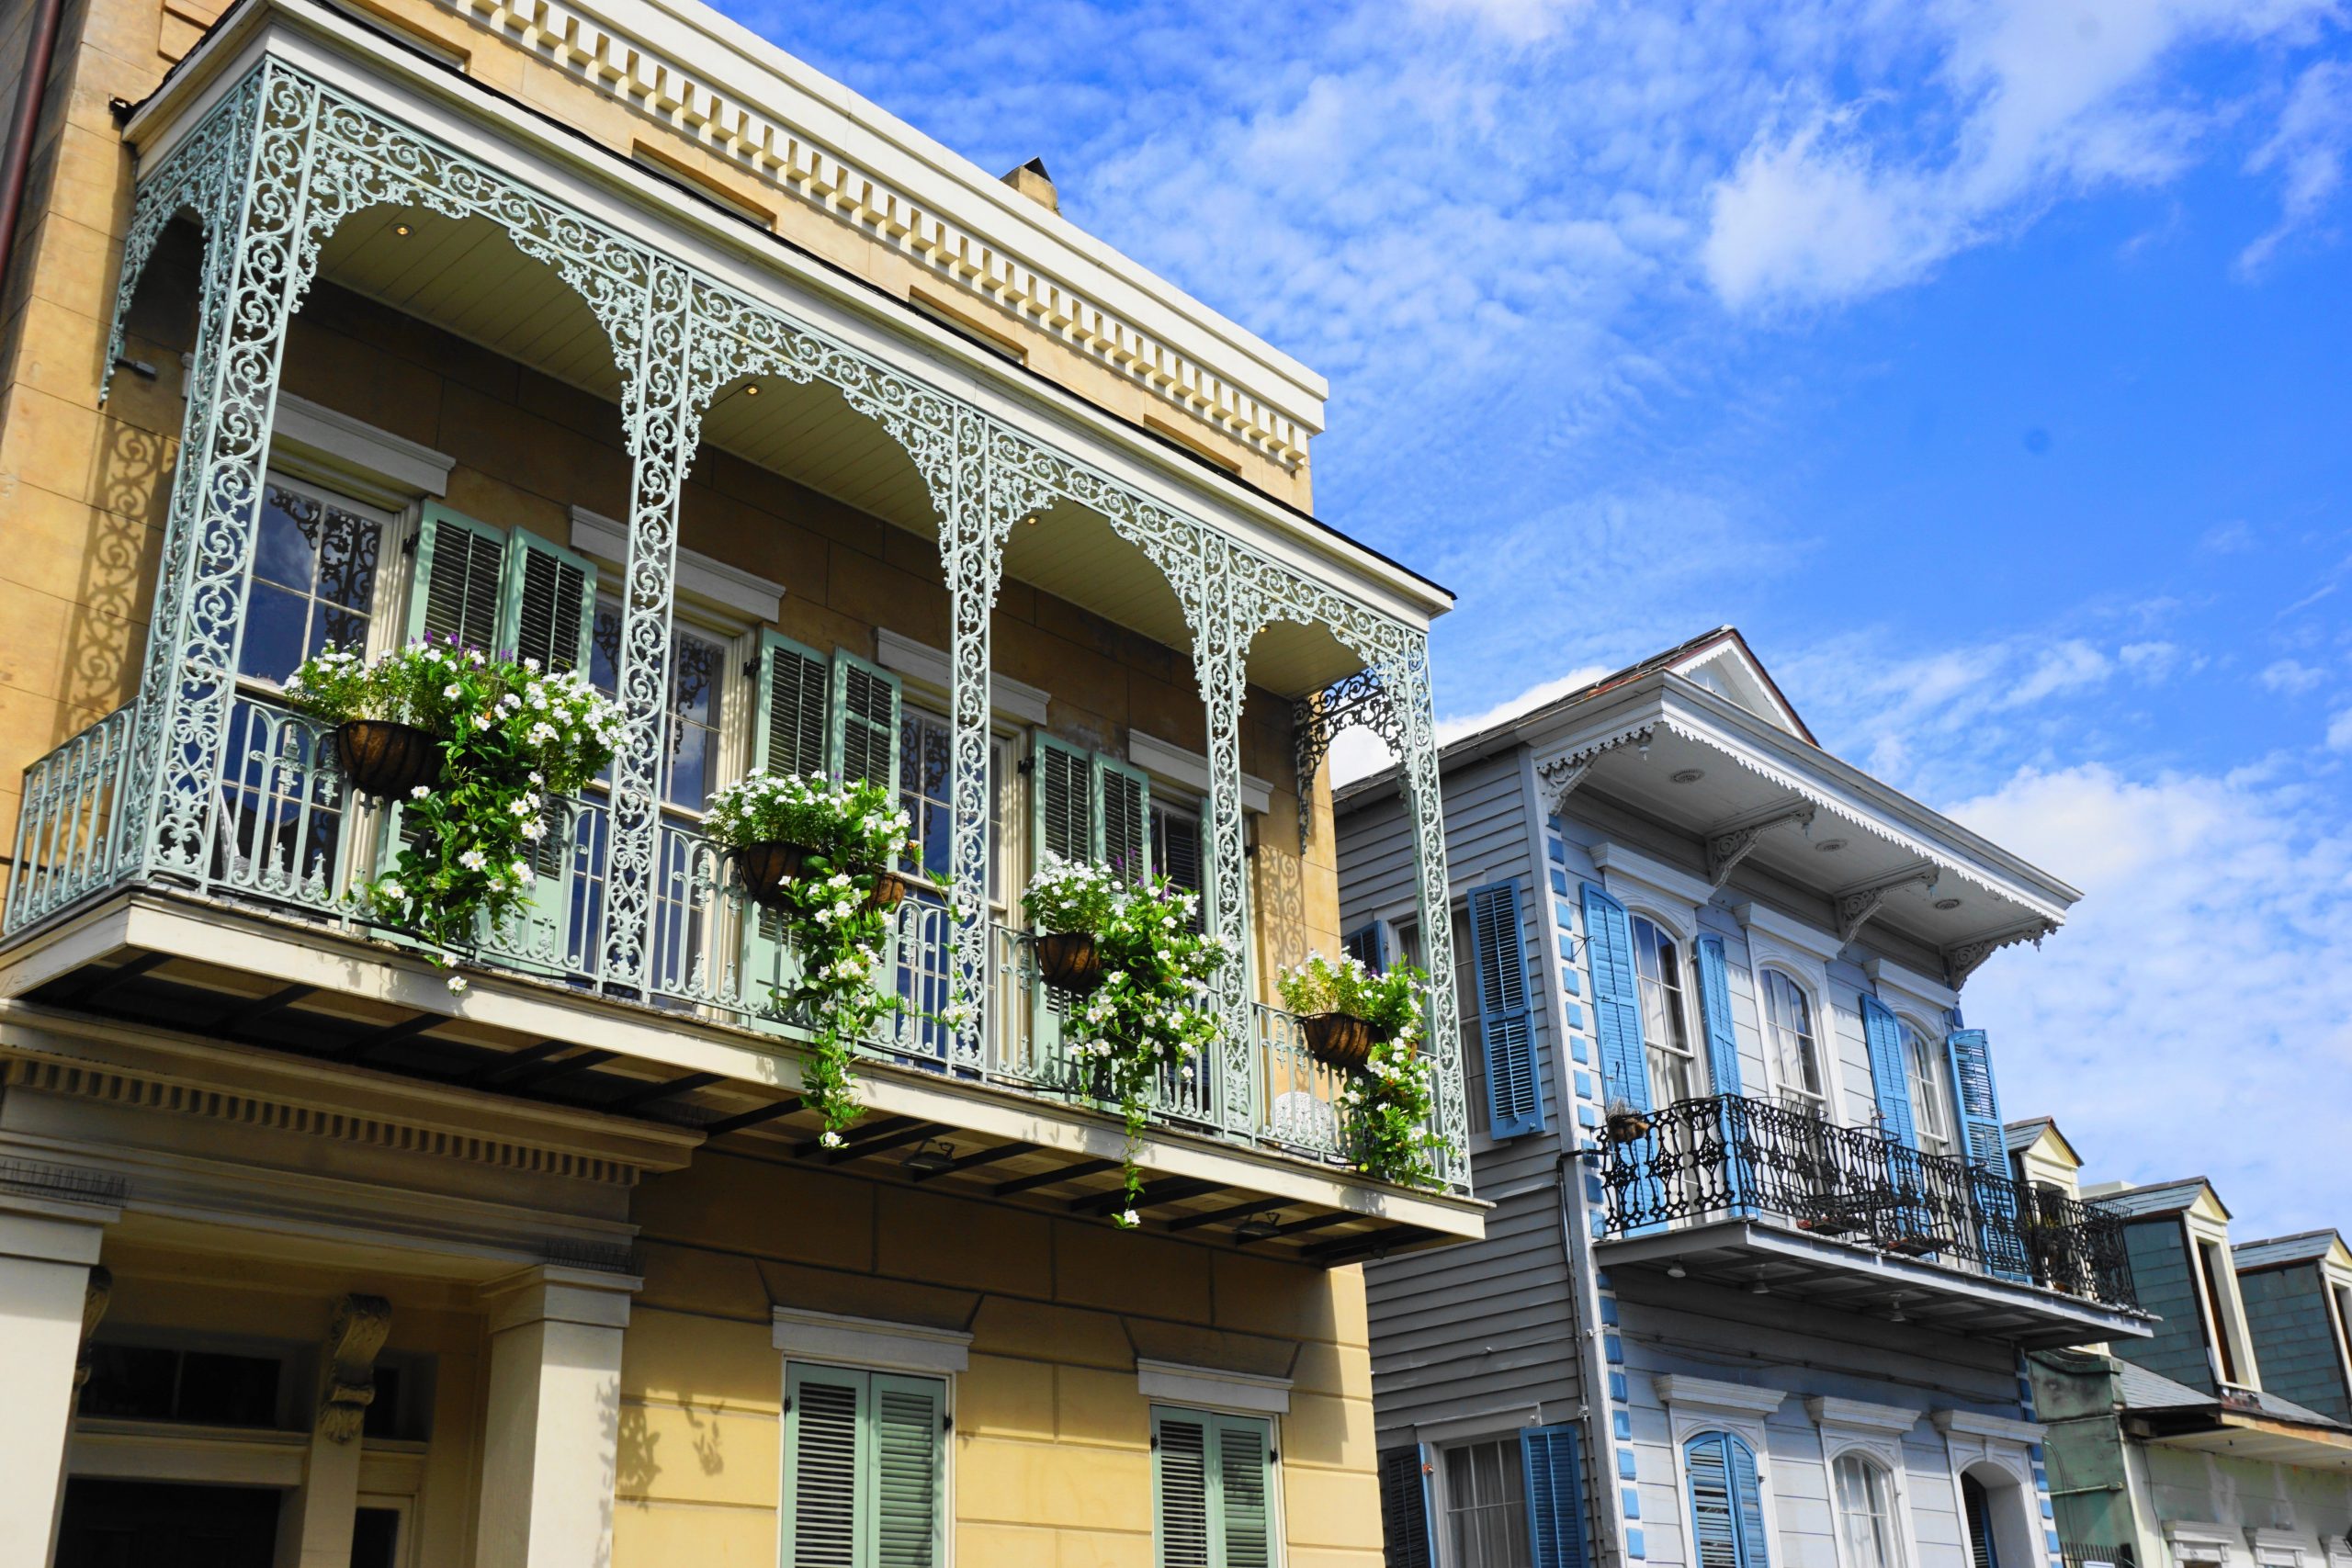 Discover top tourist attractions in New Orleans! From steamboat rides to the French Quarter to live jazz, New Orleans has it all!